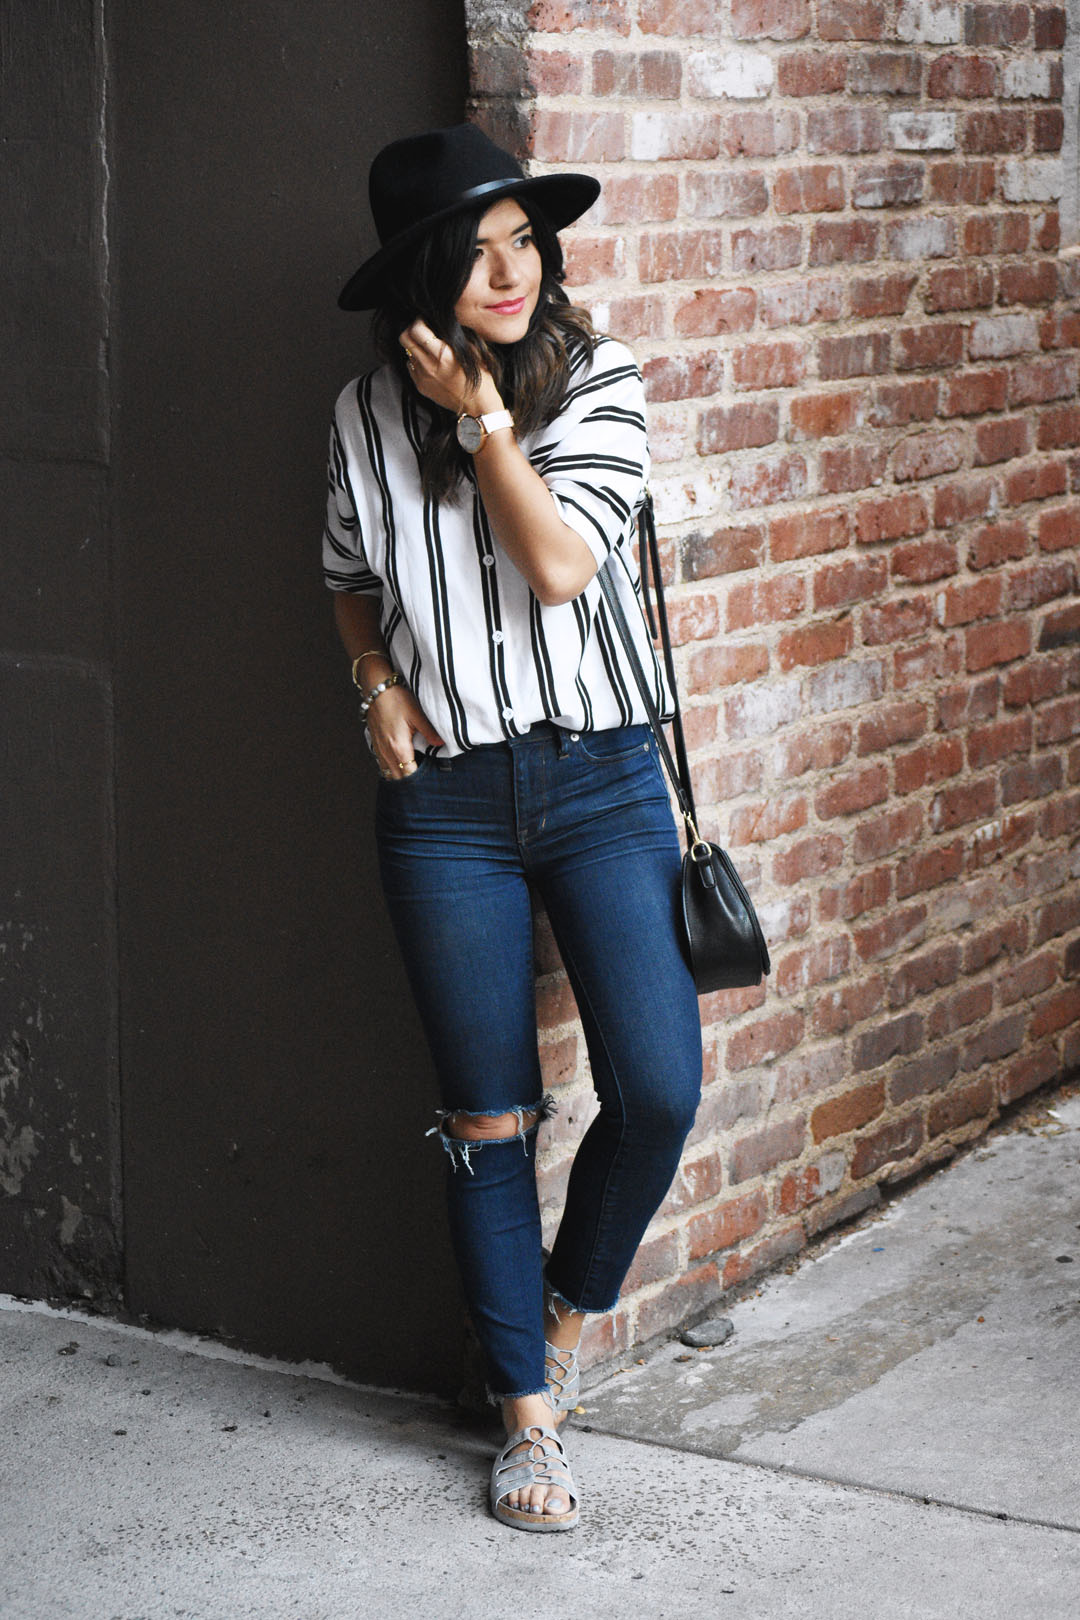 Carolina Hellal of Chic Talk wearing a stripe top, Madewell ripped jeans, and Skechers sandals